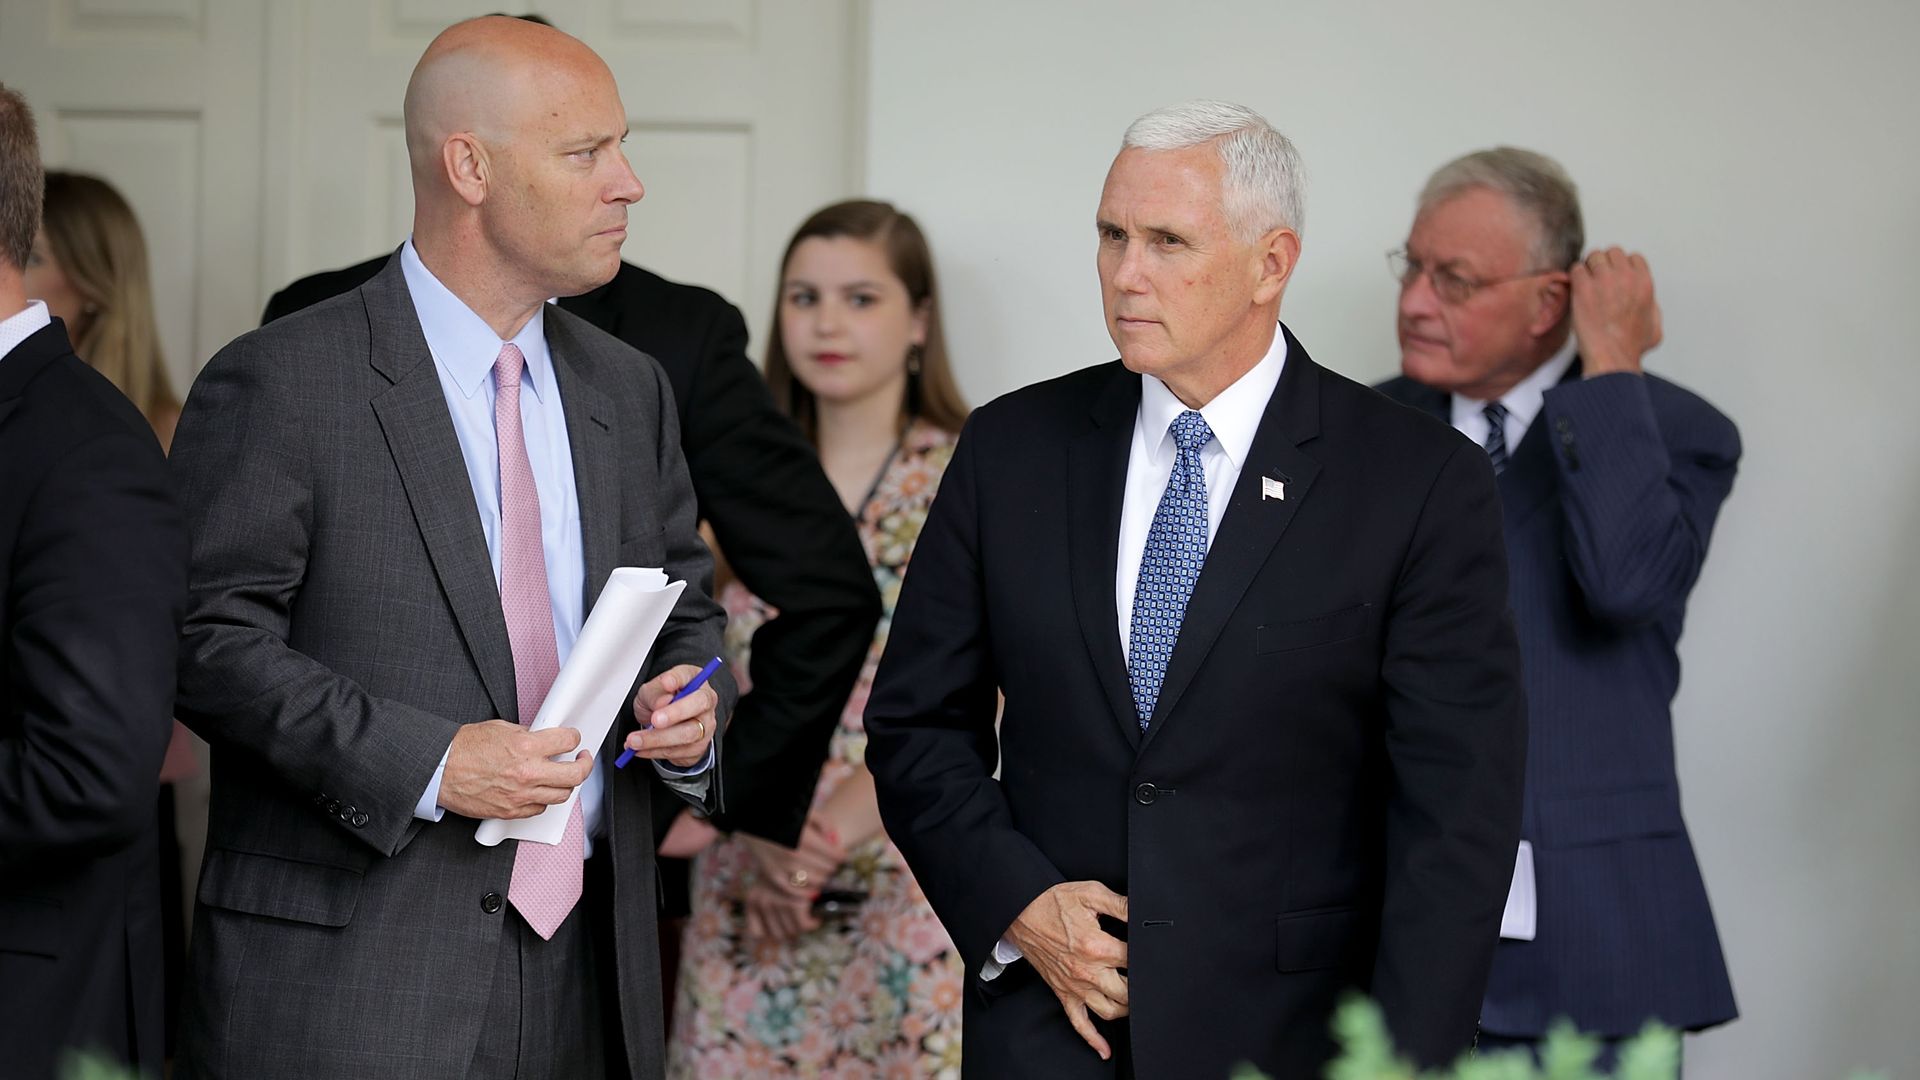 Then-White House Legislative Affairs Director Marc Short (L) and Vice President Mike Pence arrive at the Rose Garden at the White House on June 6, 2018 .